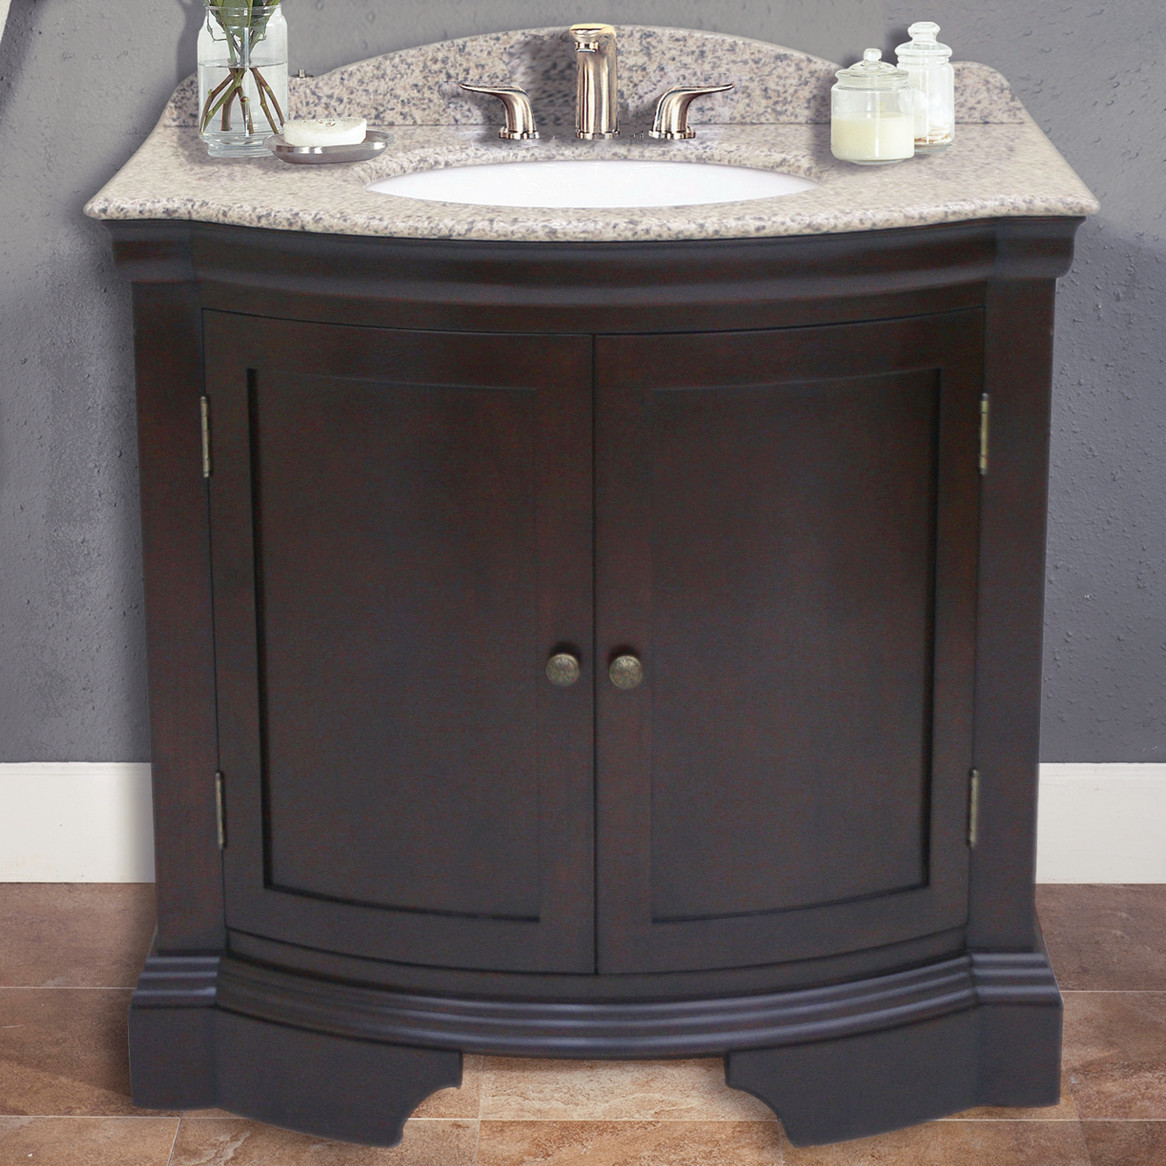 Home Depot Bathroom Vanity Clearance
 Bathroom Adds A Luxurious Feeling To Your New